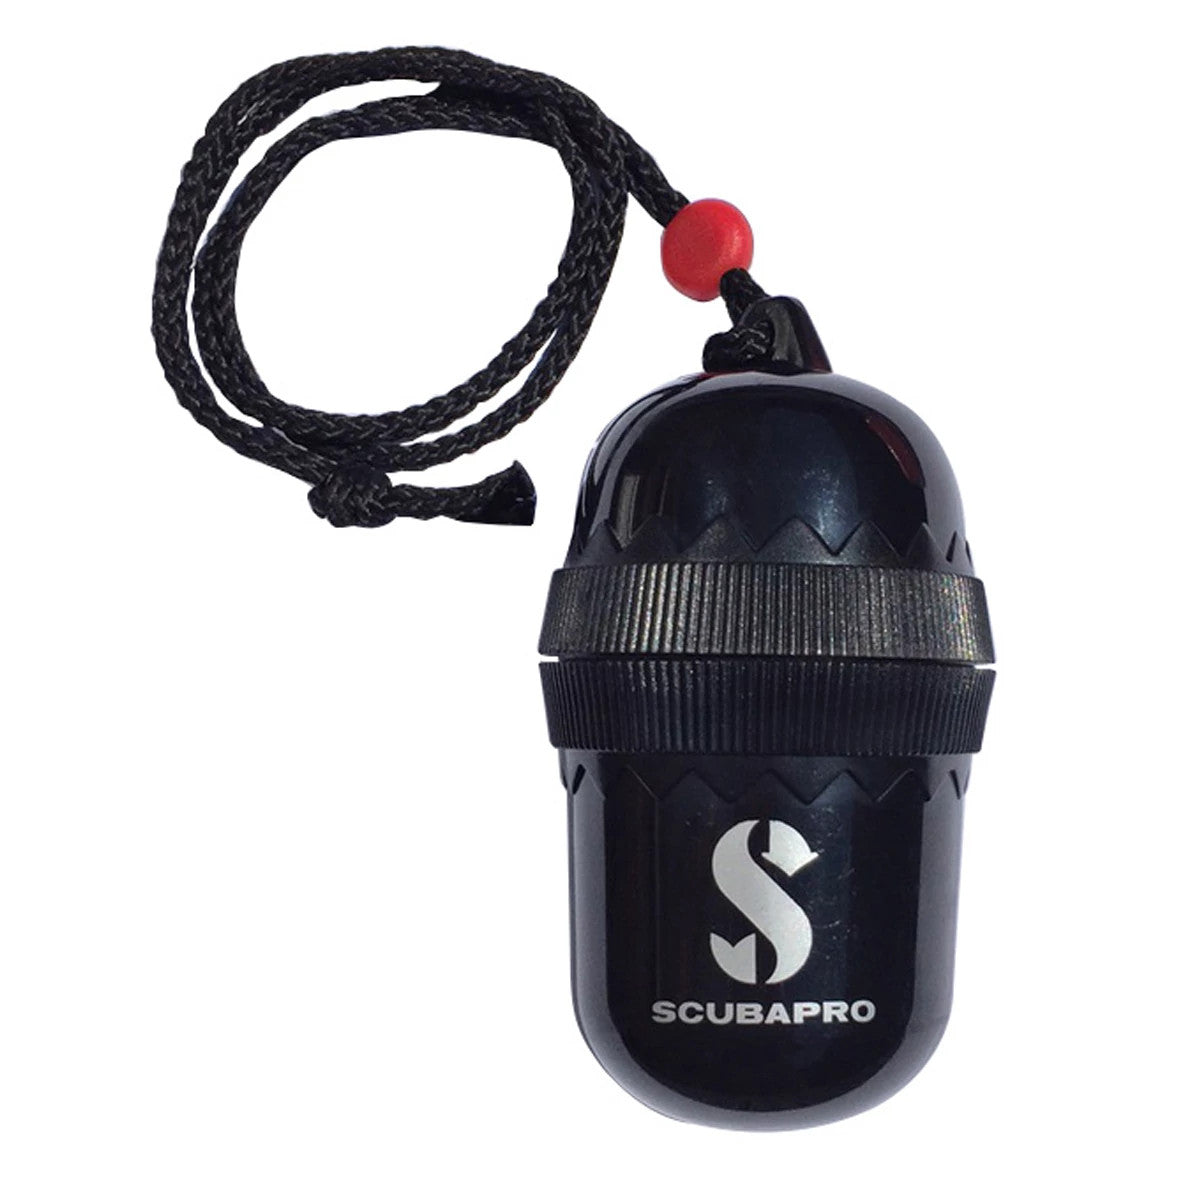 SCUBAPRO DIVER'S EGG DRY-BOX WITH STRING